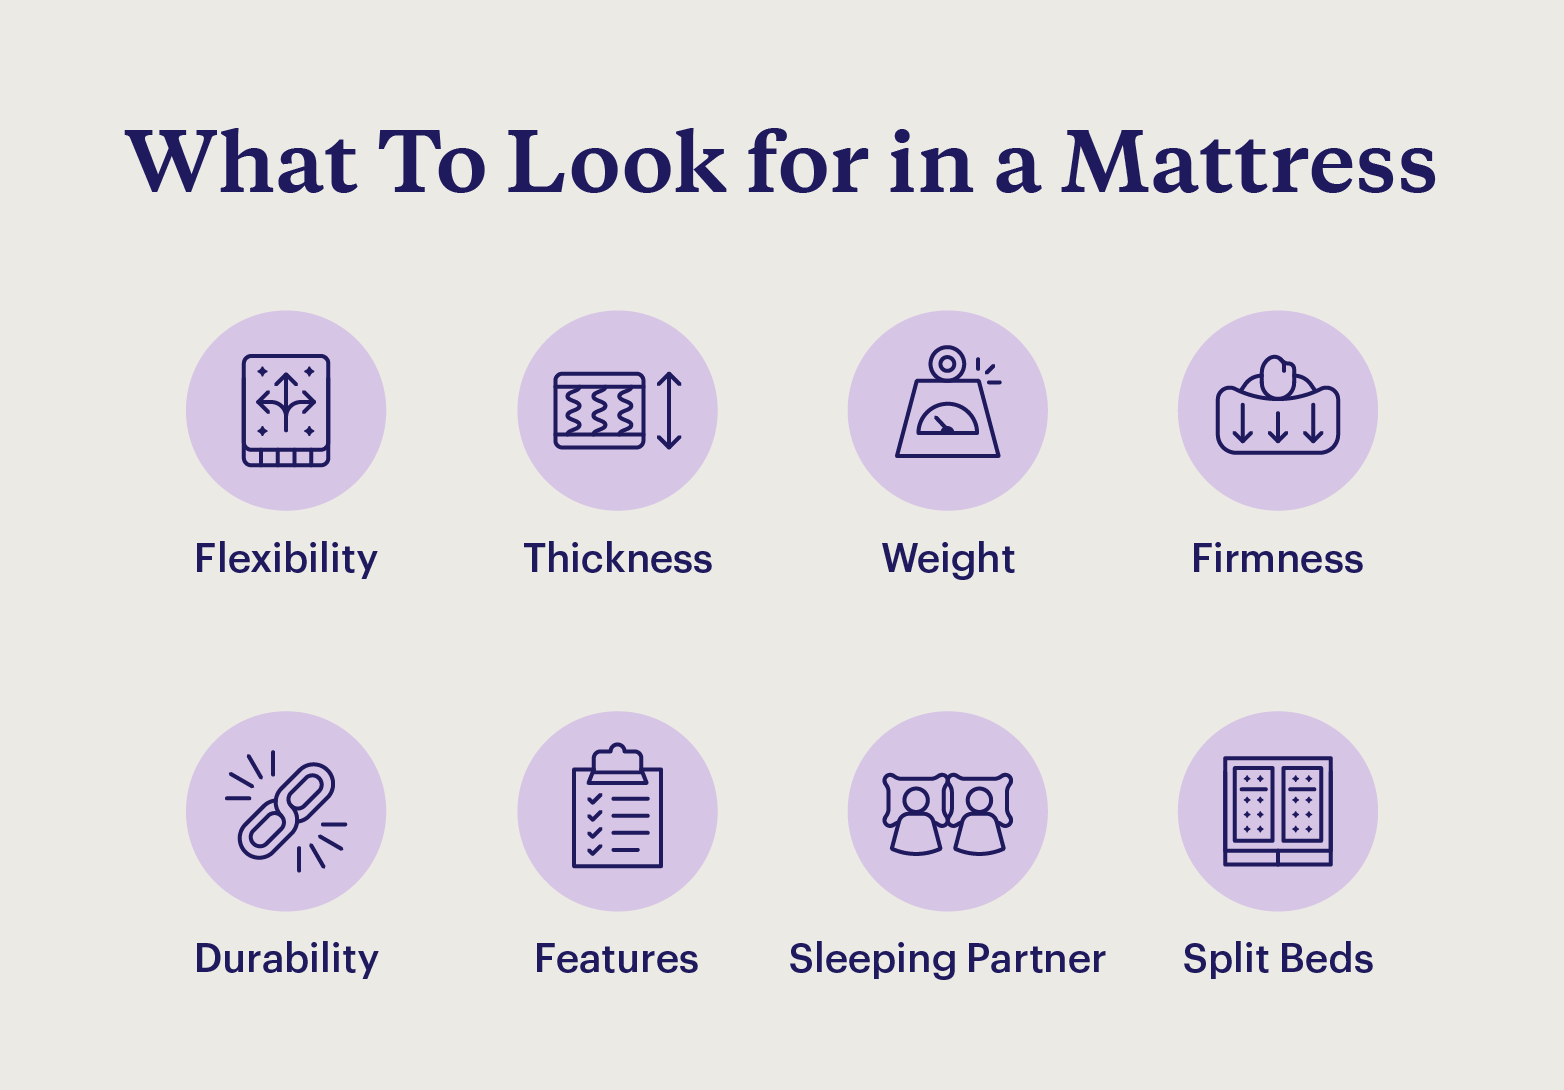 8 things you should consider when choosing a special mattress for an adjustable bed.